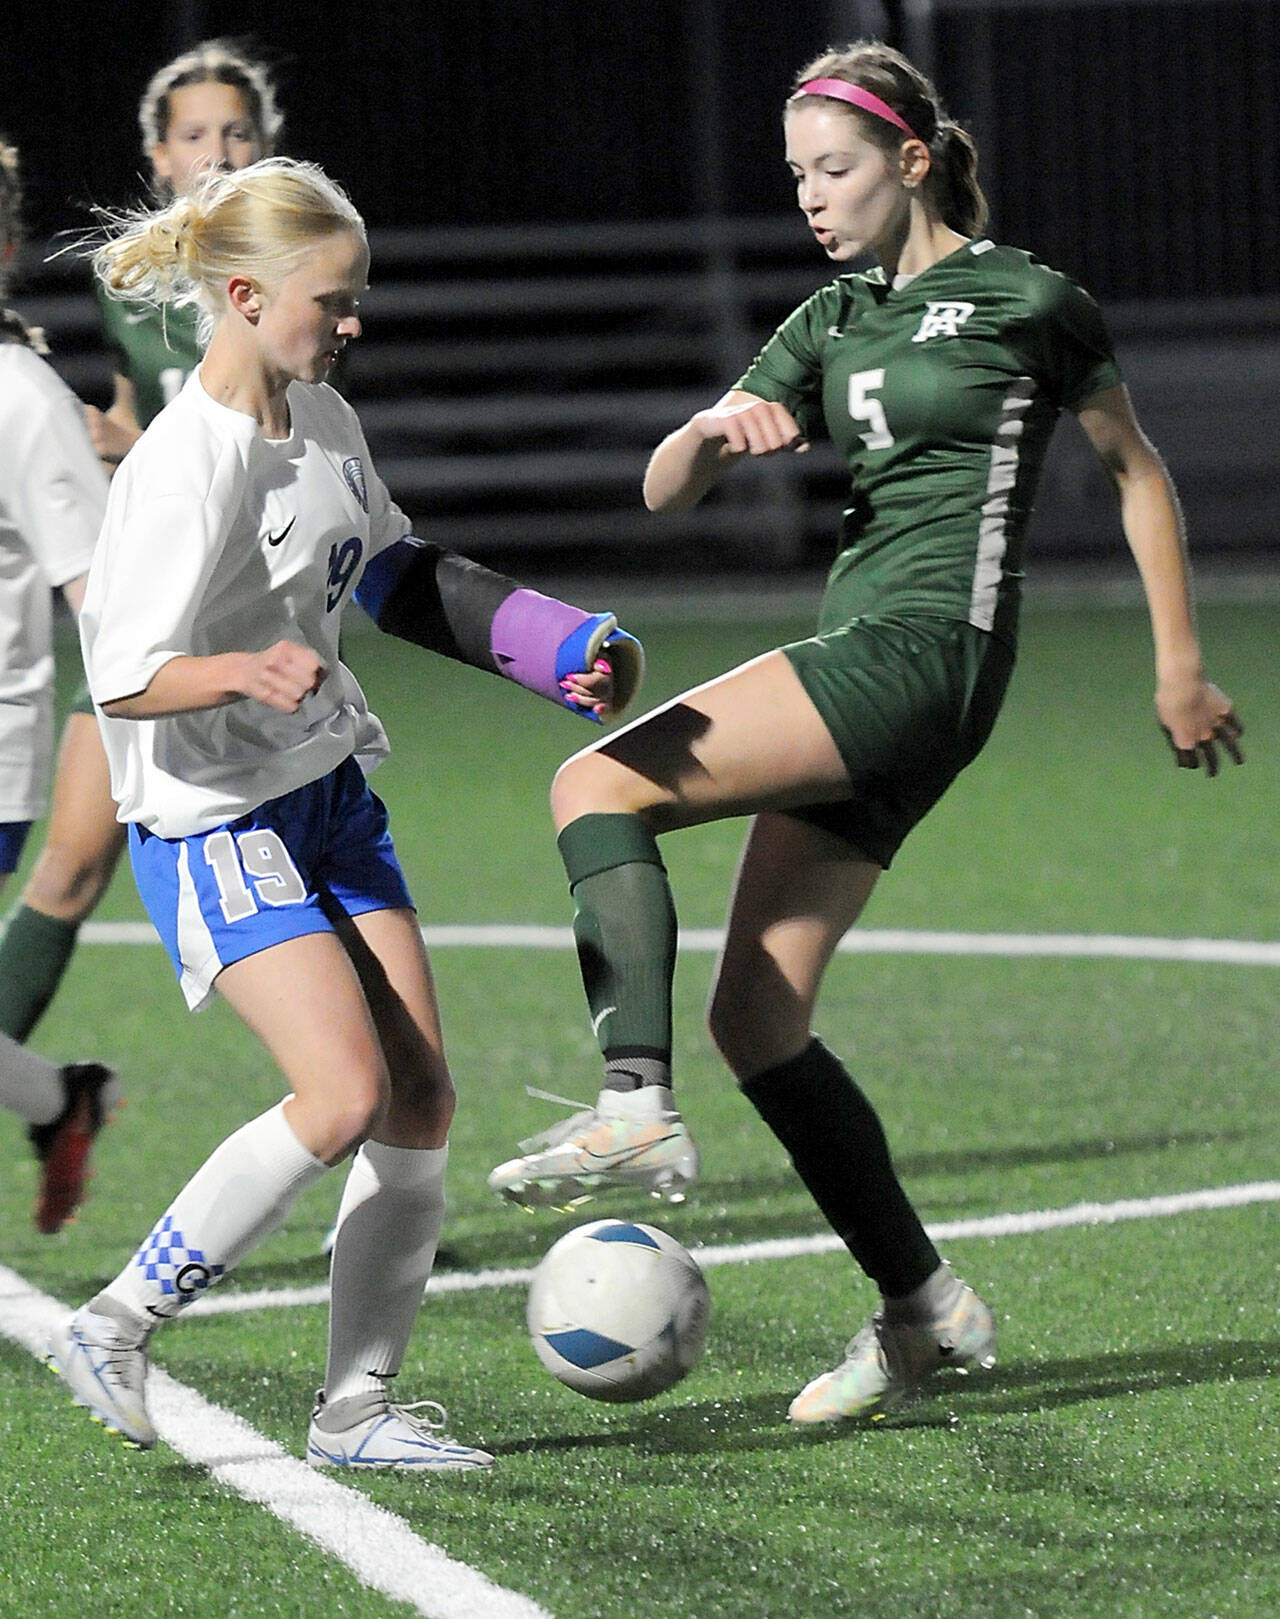 KEITH THORPE/PENINSULA DAILY NEWS Port Angeles’ Keds DeScala, right, fends off the defense of Olympic’s Emma Sagee during Thursday’s match at Wally Sigmar Field in Port Angeles.